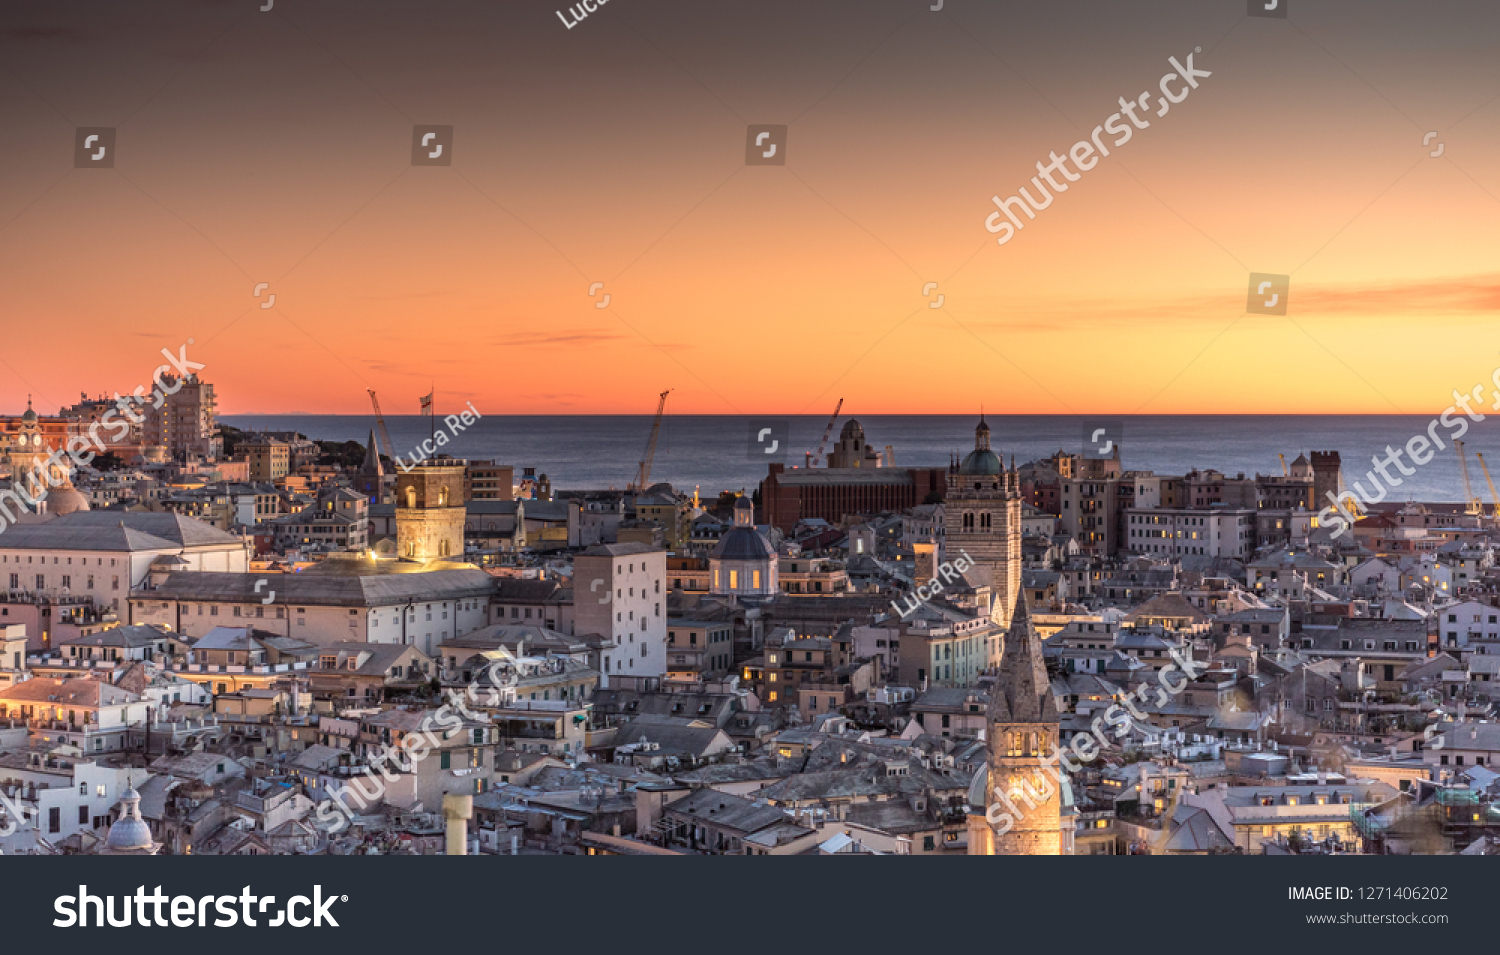 Genova, Italy: Beautiful sunset aerial panoramic view of Genoa historic centre old town (San Lorenzo Cathedral, duomo, Palazzo Ducale), sea and port at dusk. Romantic cityscape Europe at night #1271406202